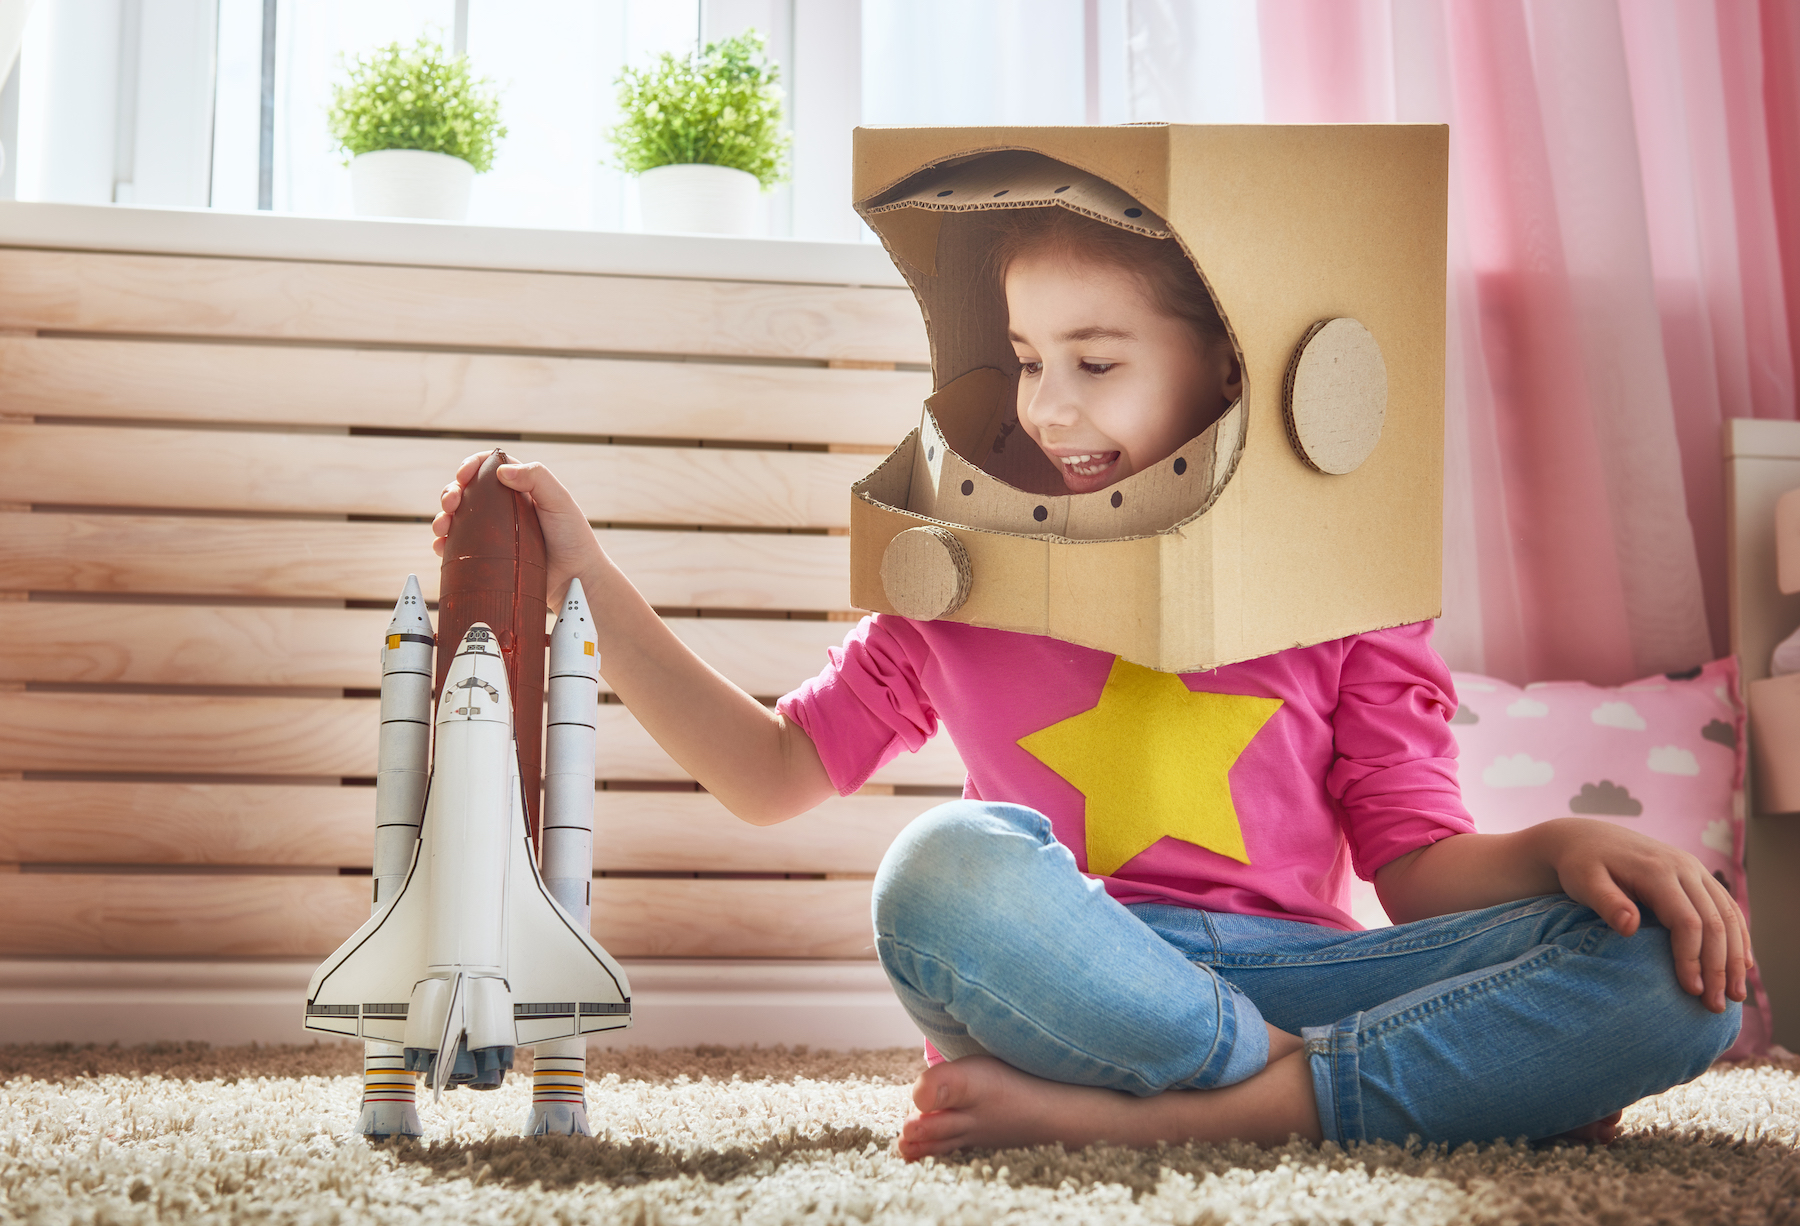 Child girl in an astronaut costume with toy rocket playing and dreaming of becoming a spacemen. Portrait of funny kid near windows.